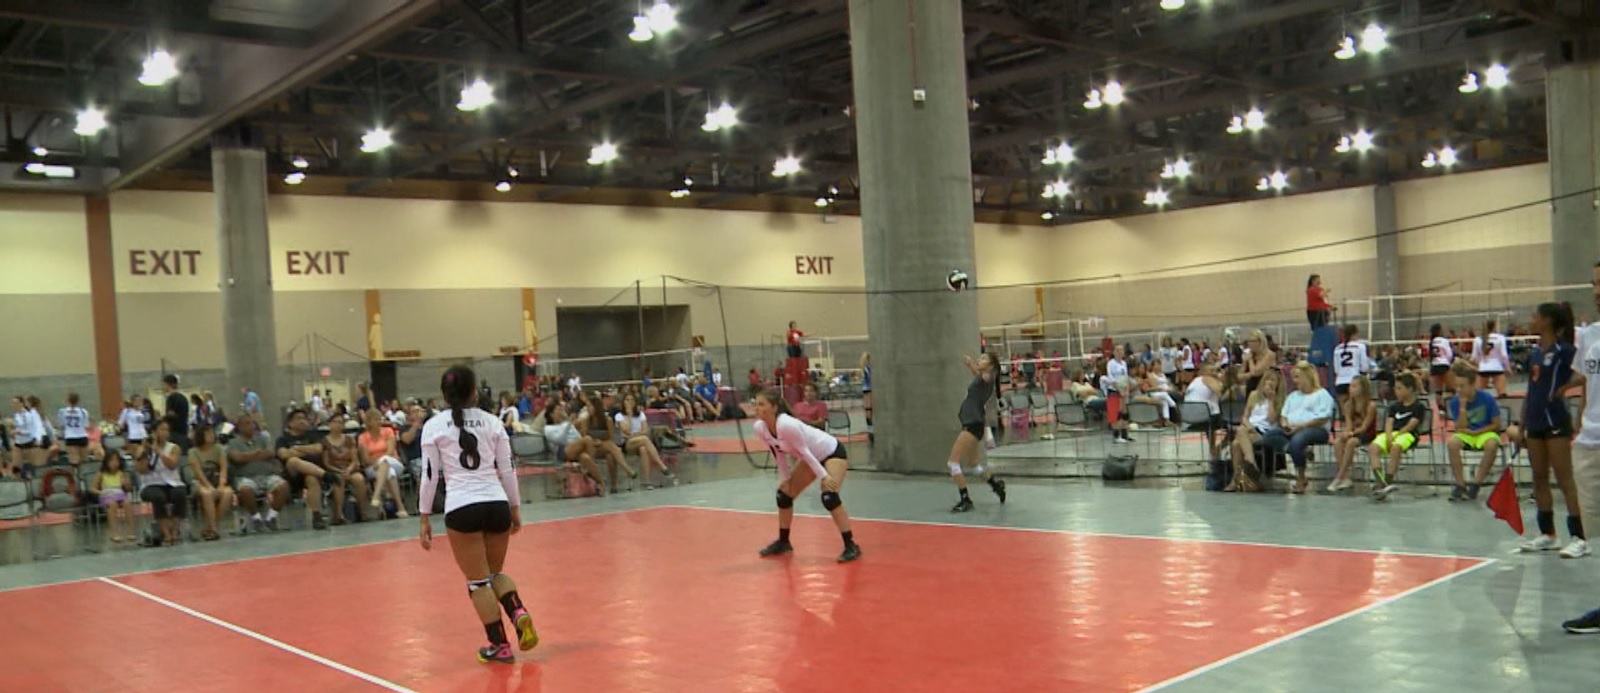 Volleyball Festival an important event for the sport, Phoenix